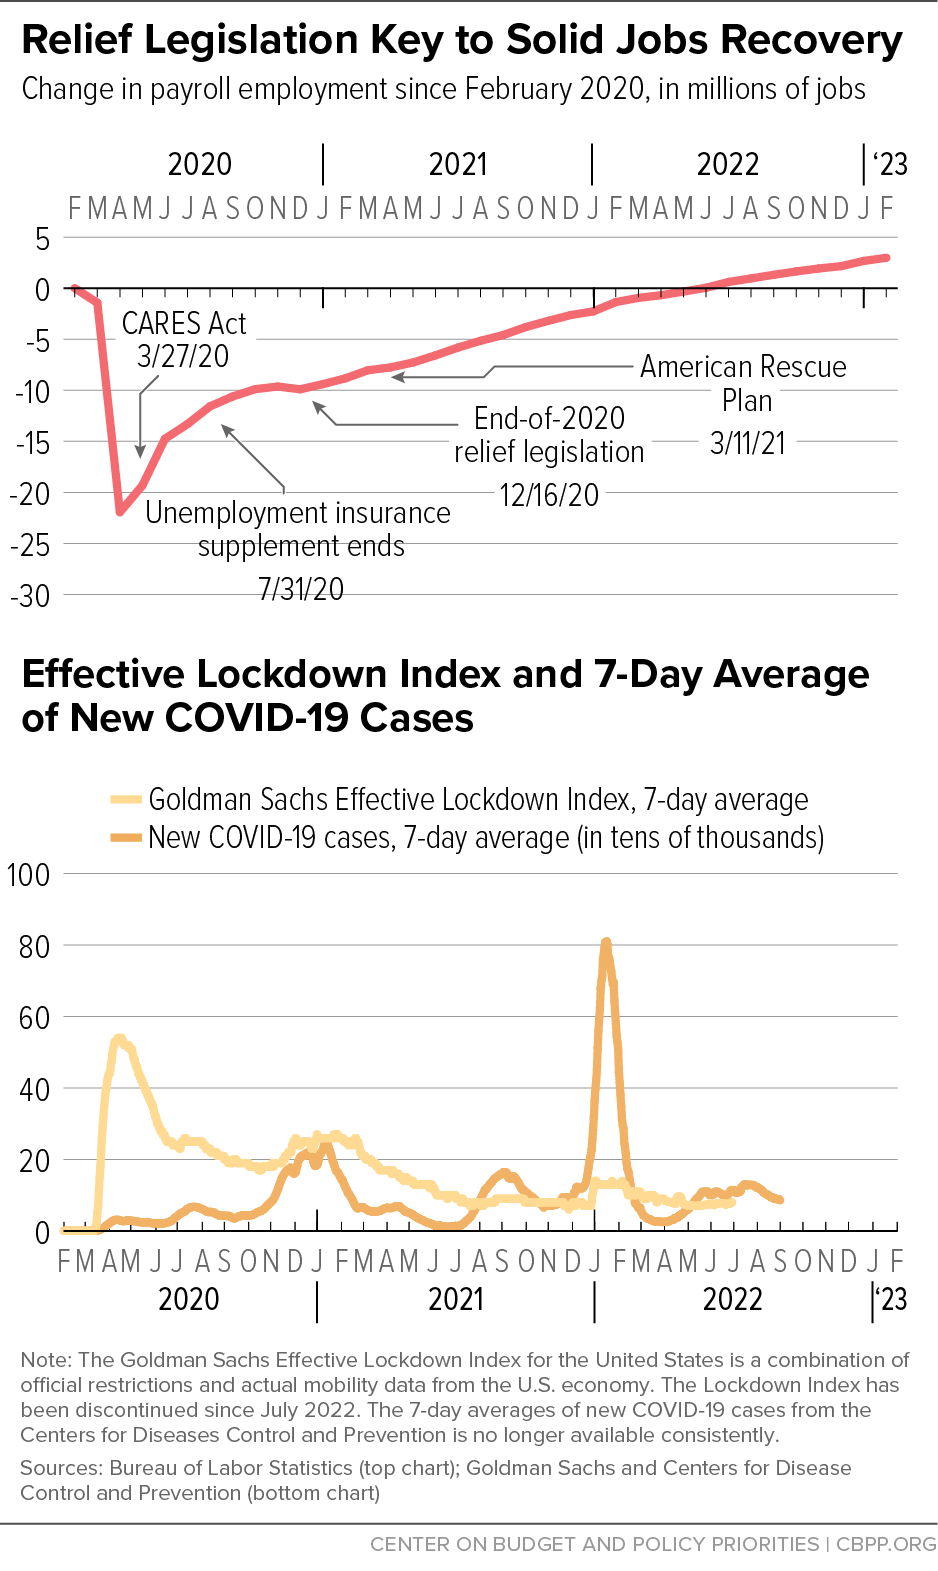 Relief Legislation Key to Solid Jobs Recovery; Effective Lockdown Index and 7-Day Average of New COVID-19 Cases